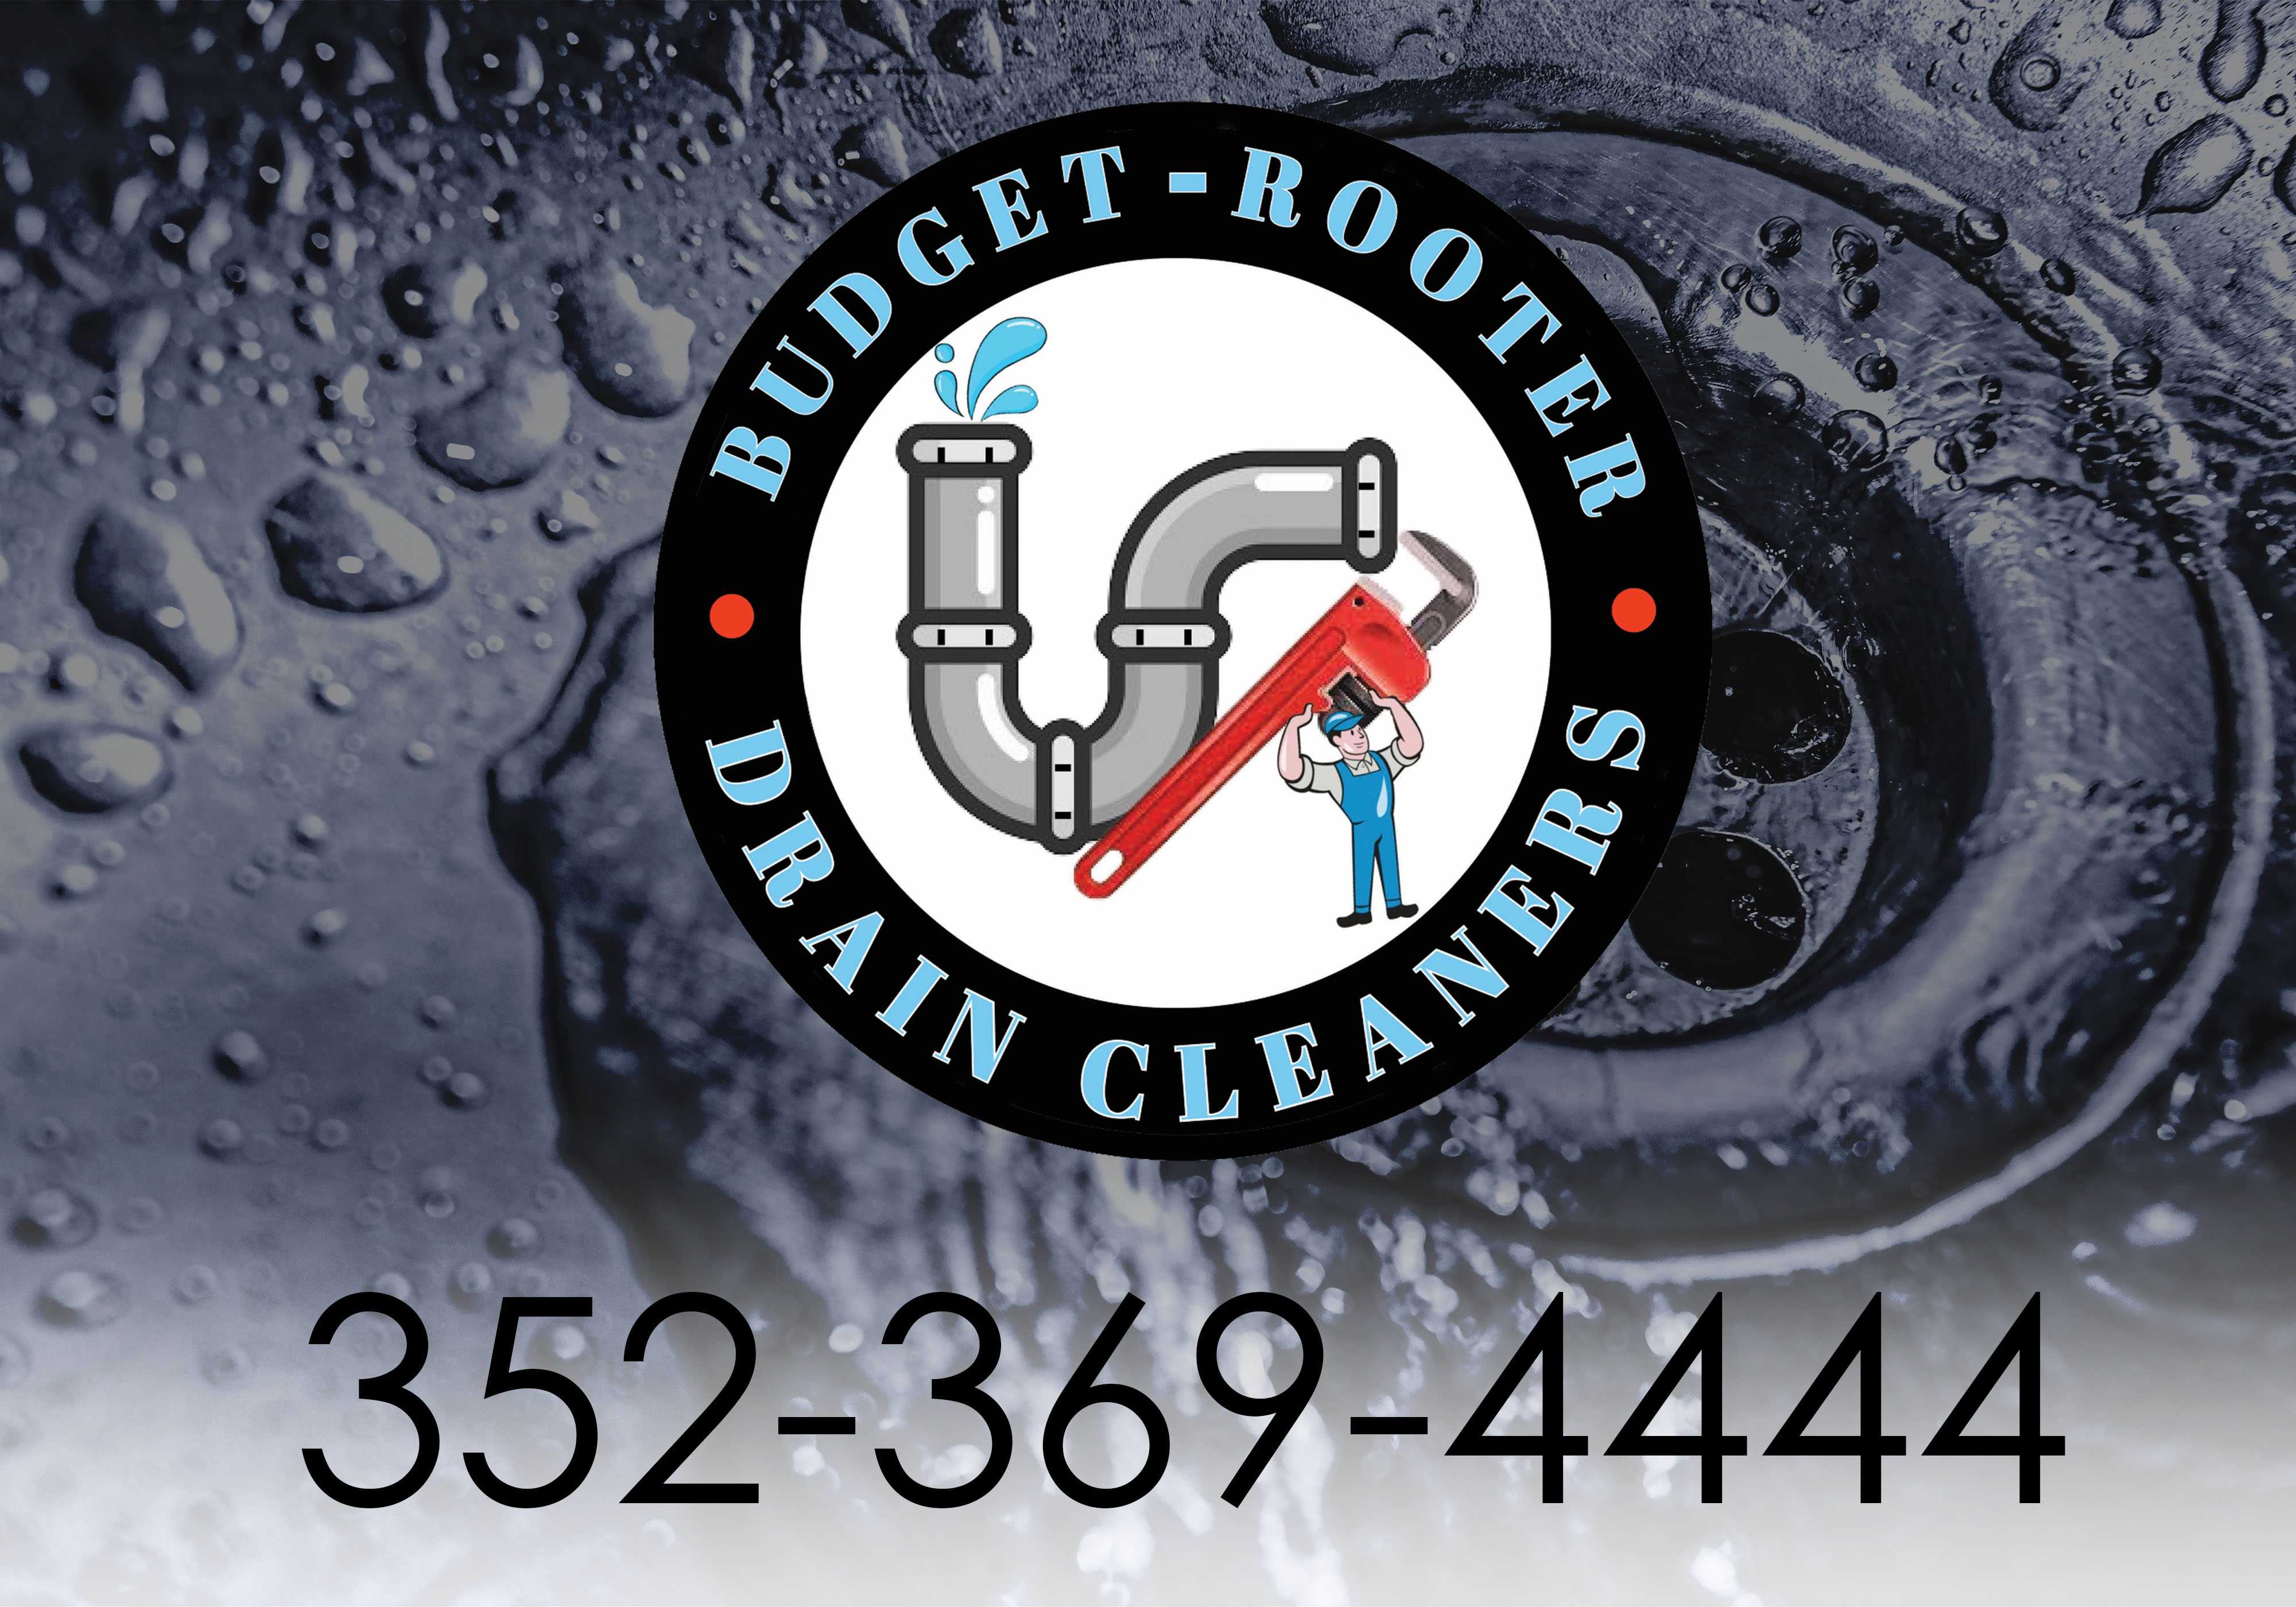 Drain Cleaning Service for Ocala FL, Belleview FL, Inverness FL, Crystal River FL.